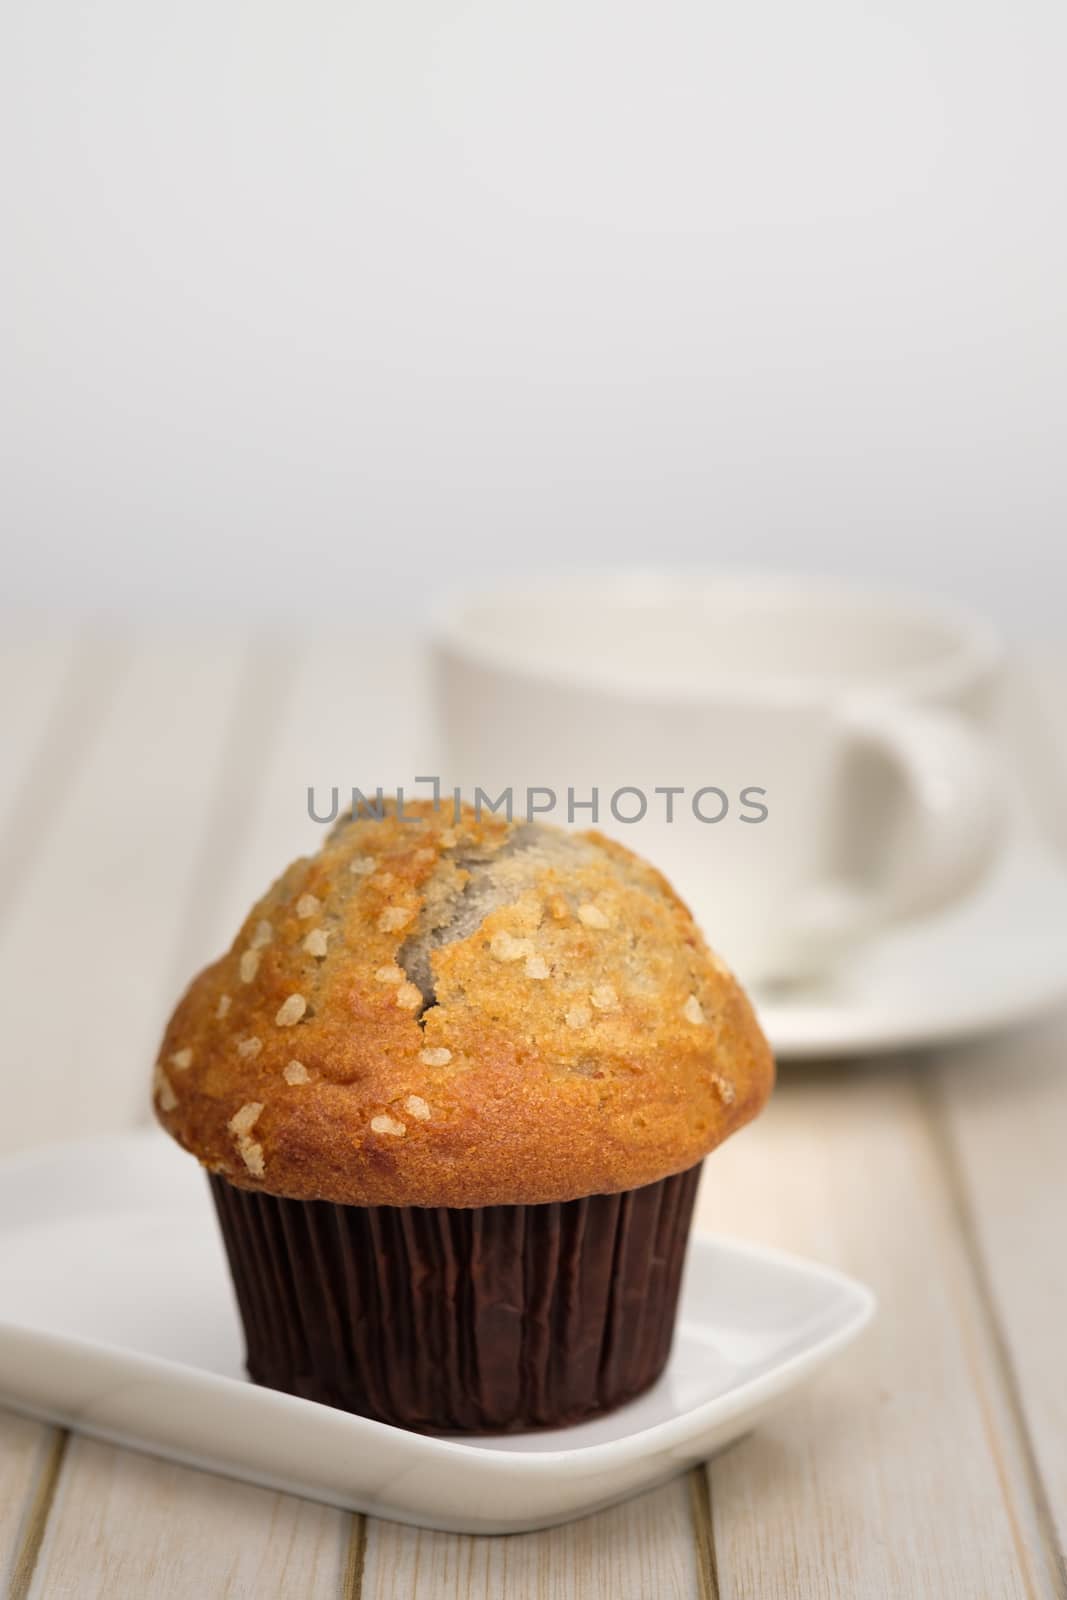 Blueberries muffins on white background, copy space to write. Vertical picture.